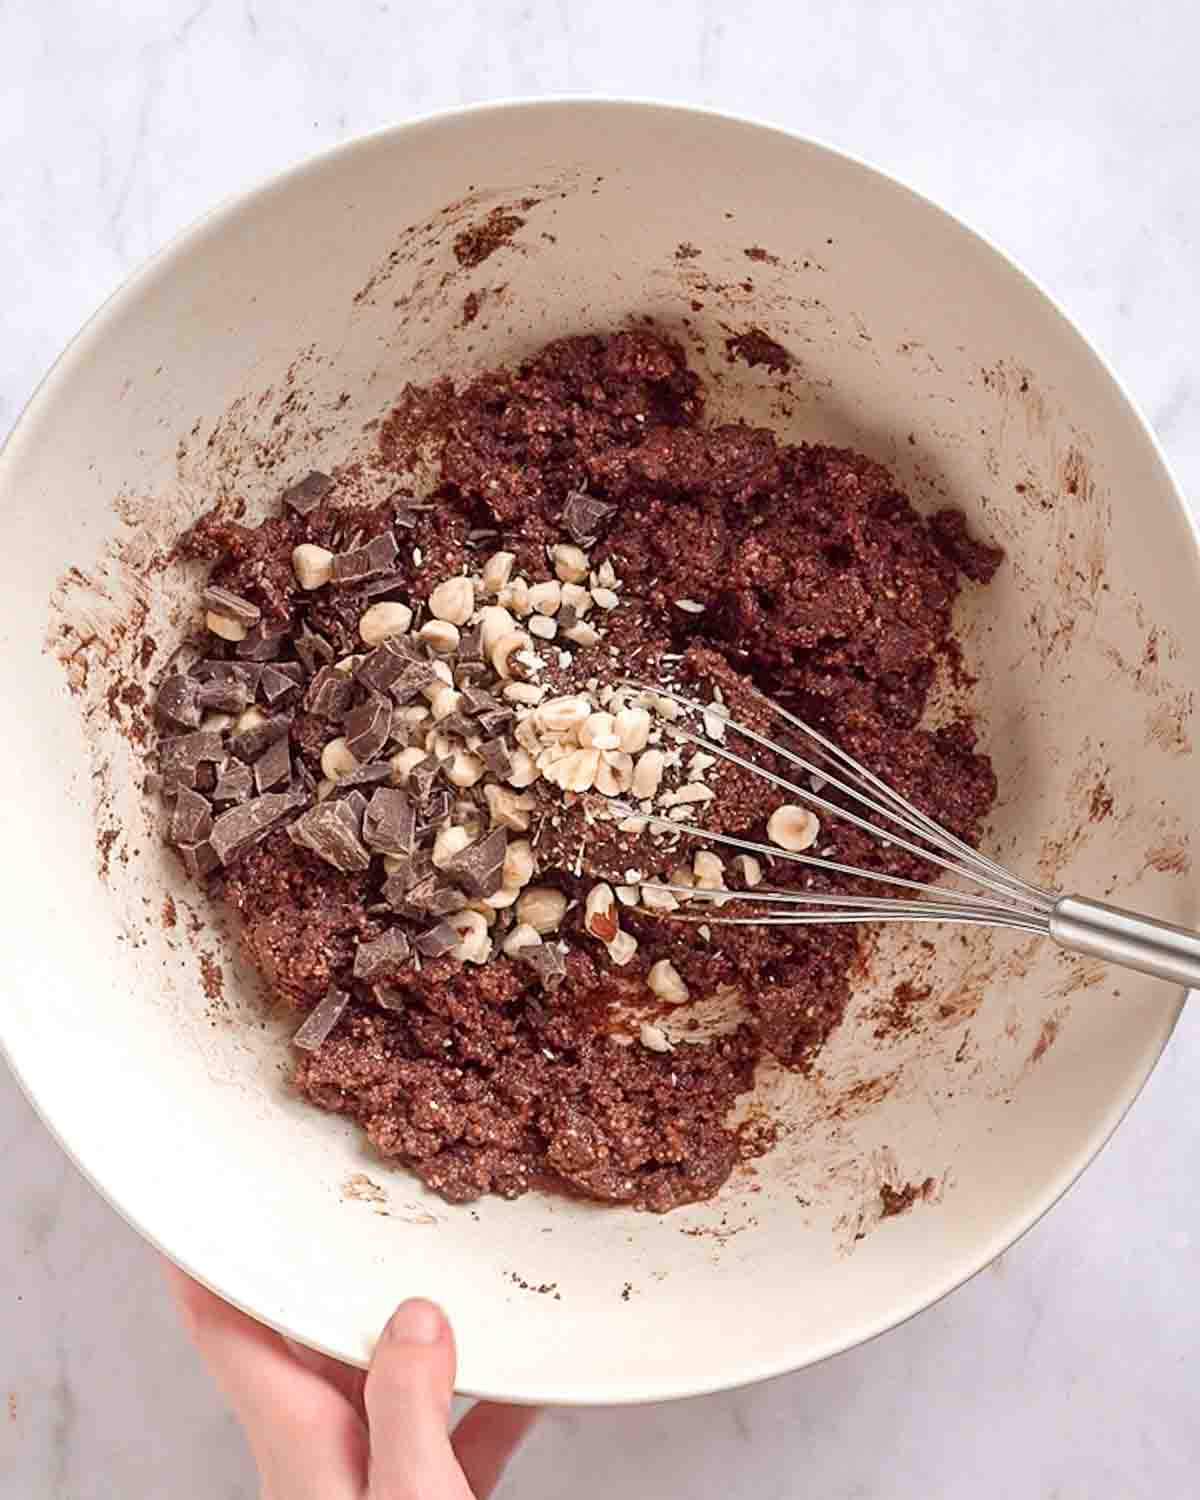 hazelnuts and chocolate chips added to the cookie dough in a large bowl.